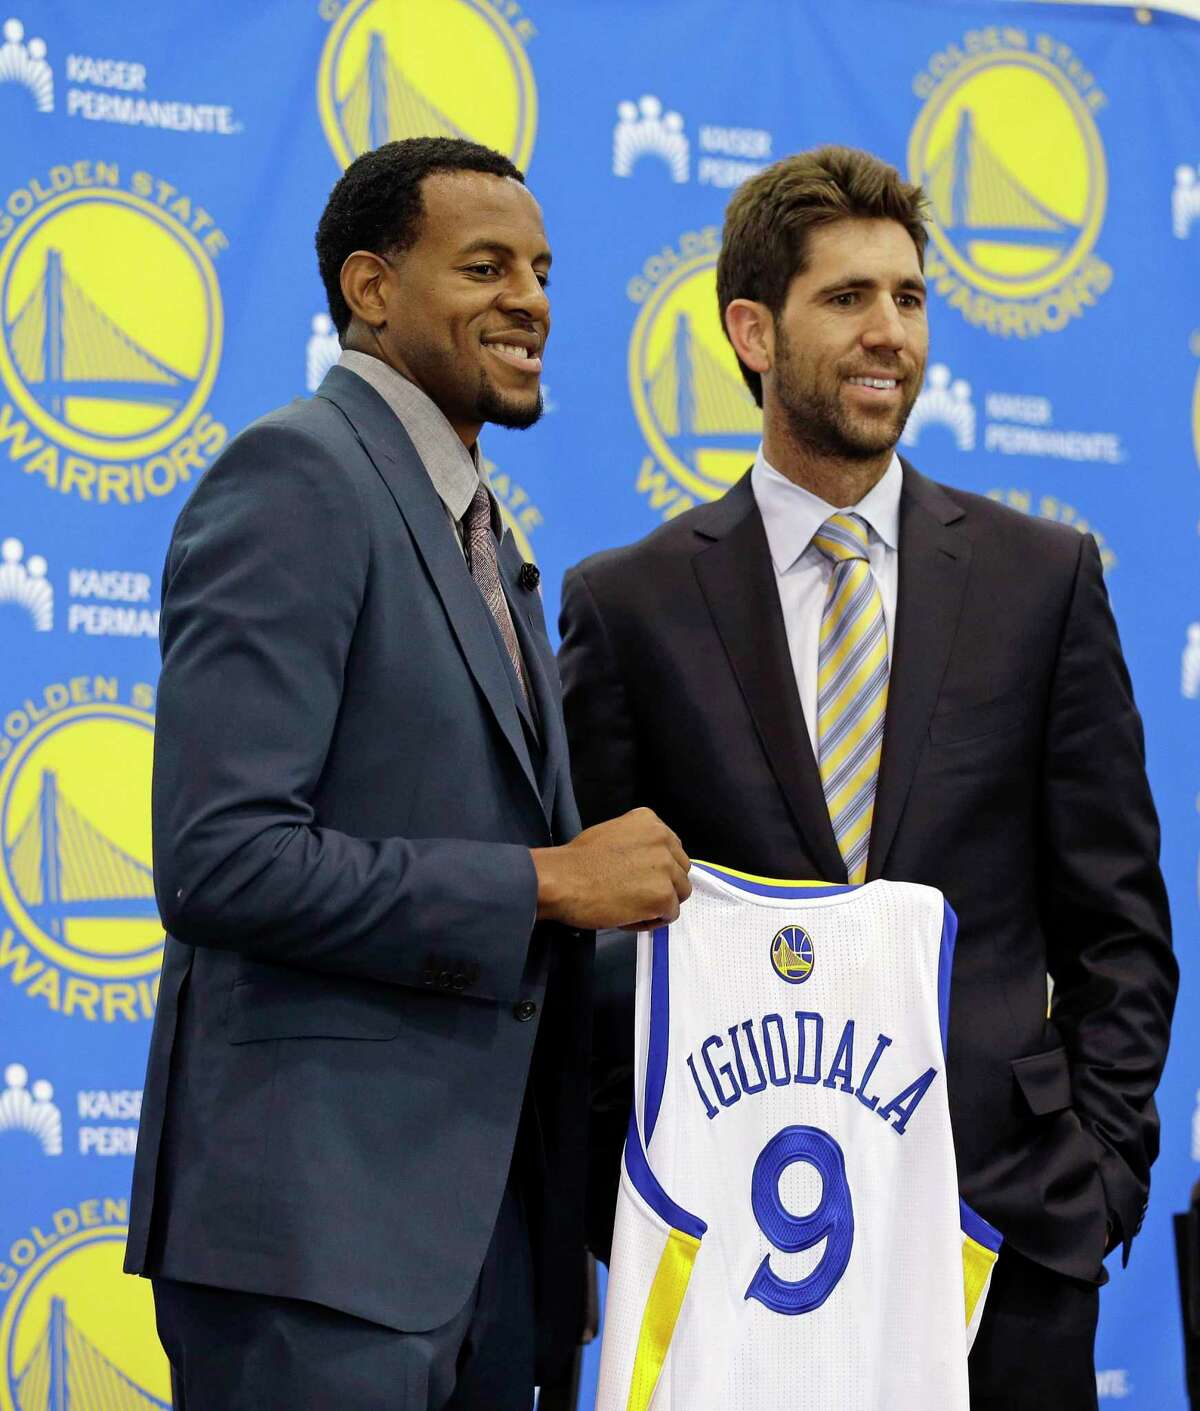 Andre Iguodala, left, poses with Golden State Warriors general manager Bob Myers, right, after being introduced by the NBA basketball team at a news conference on Thursday, July 11, 2013, in Oakland, Calif. The Warriors formally introduced their prized free agent acquisition who spurned the Denver Nuggets to join the rejuvenated Warriors on a four-year, $48 million deal. (AP Photo/Eric Risberg)